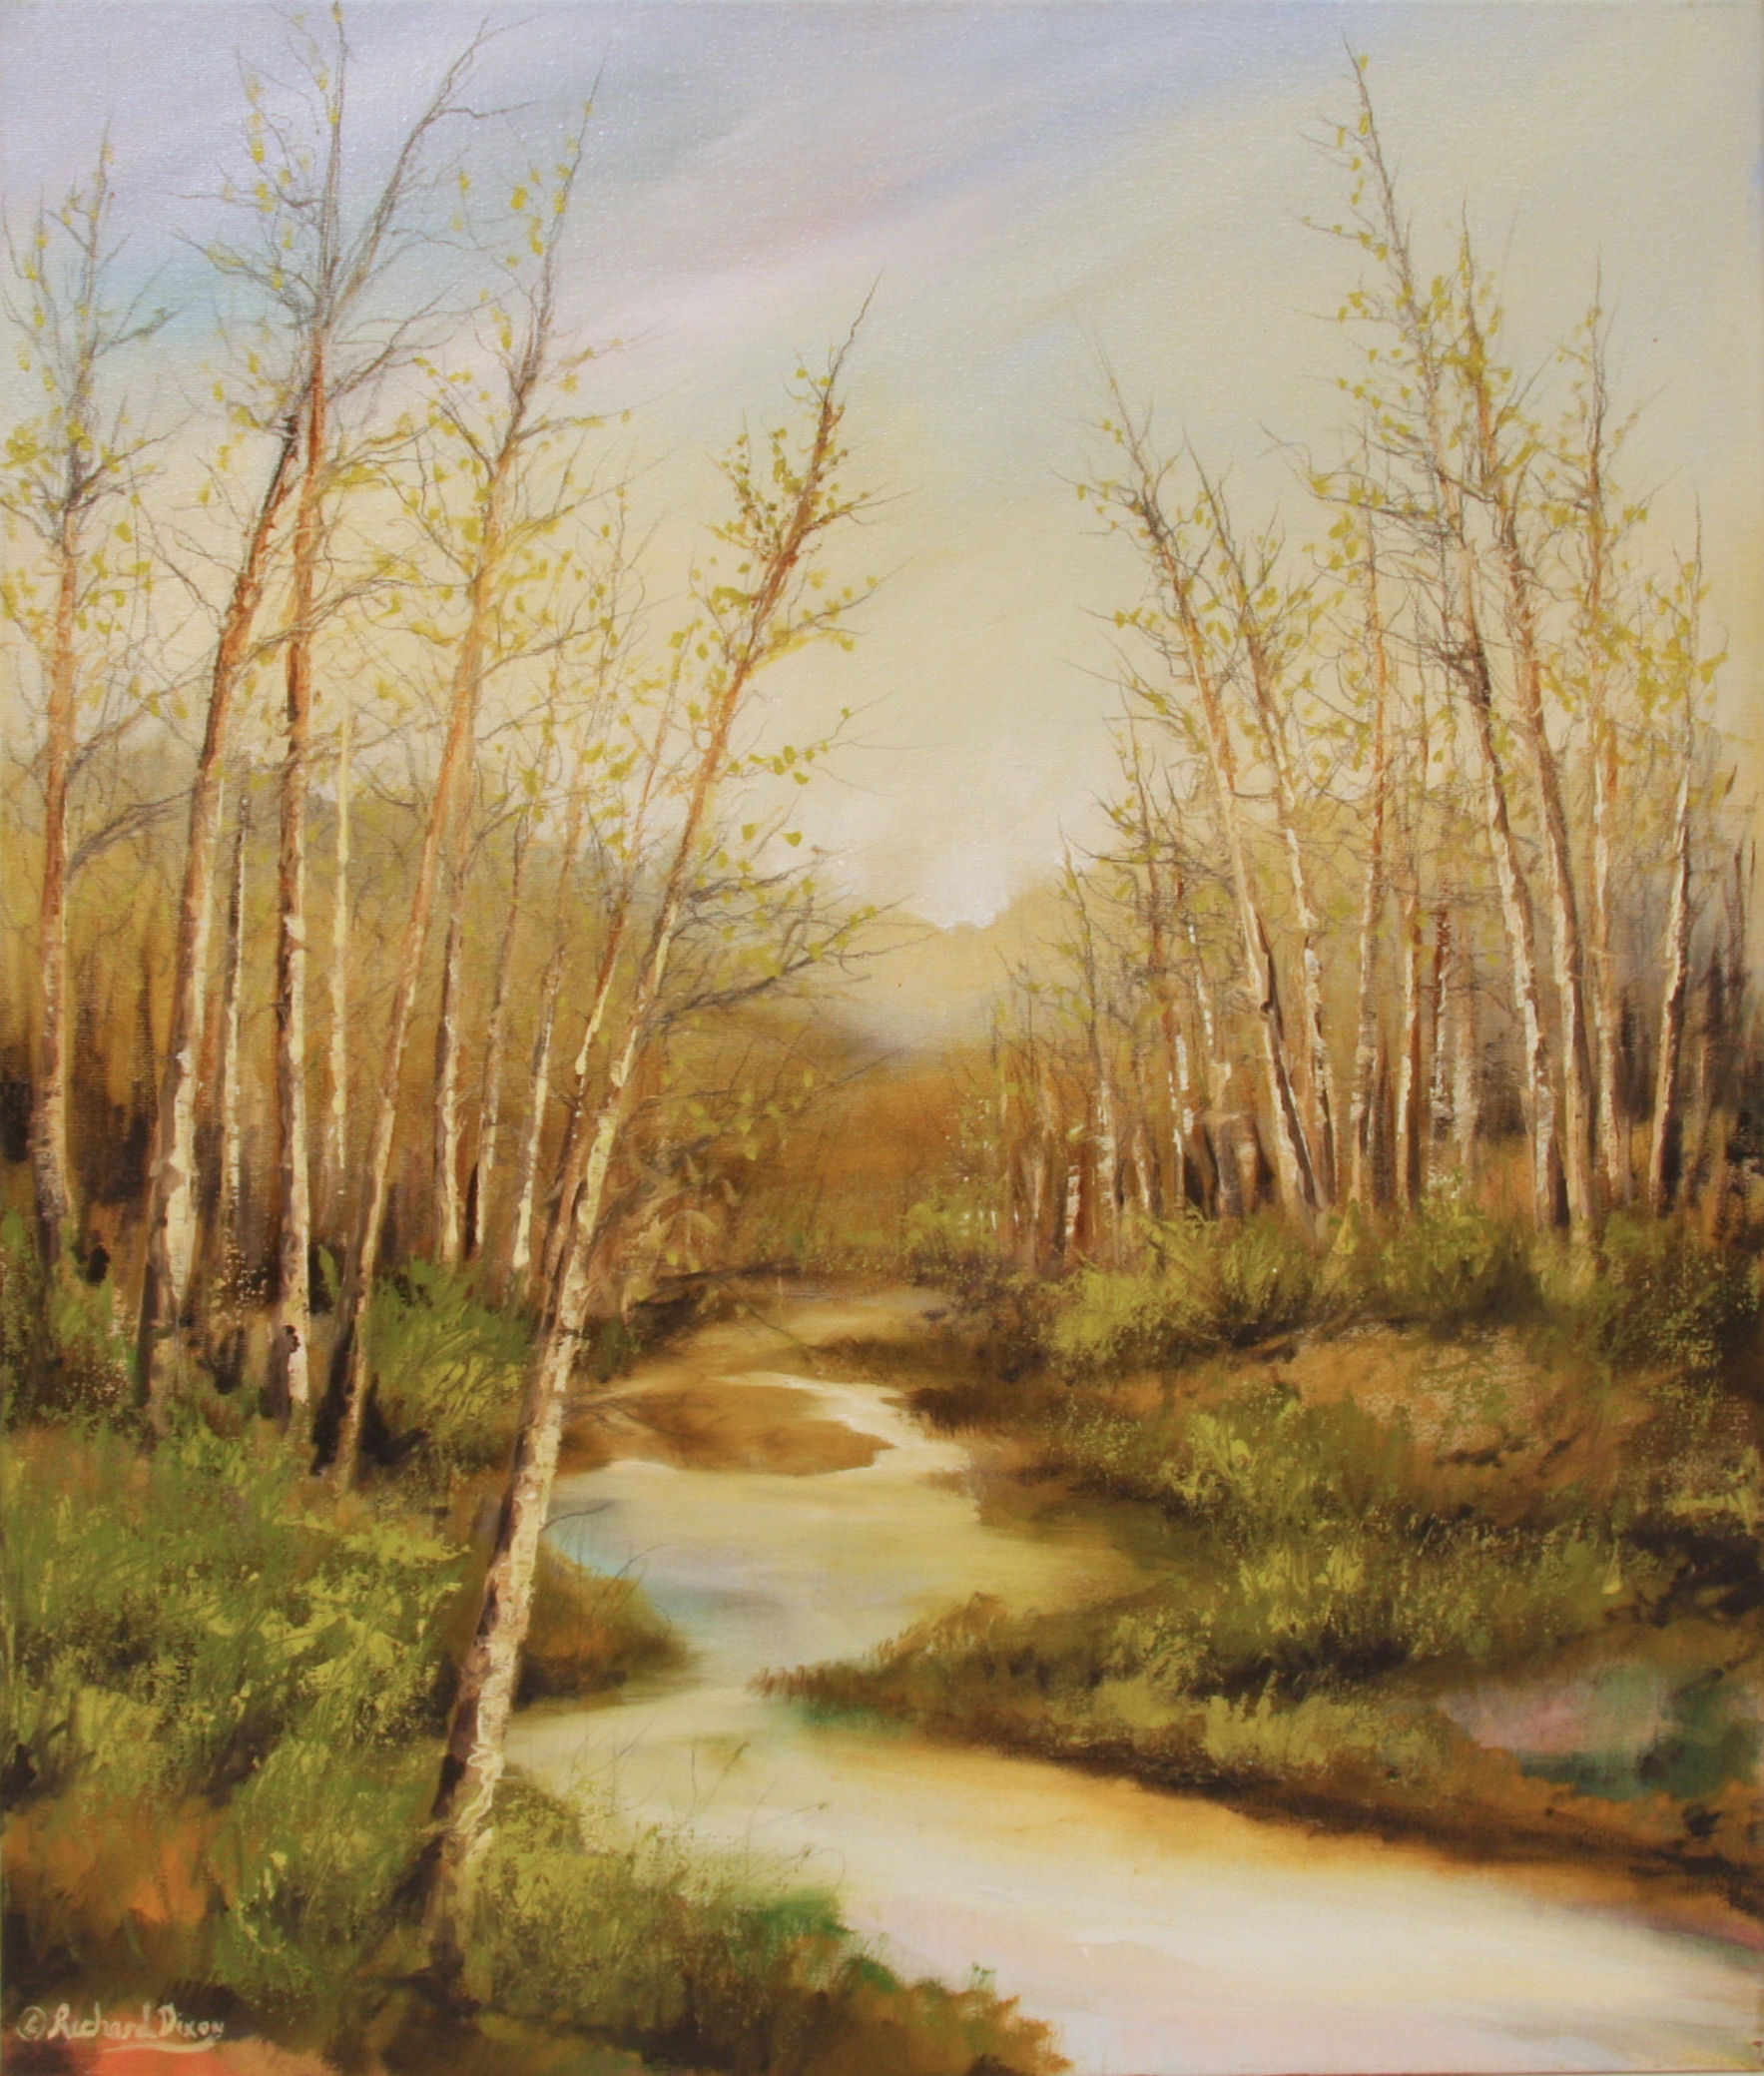 Mill Creek Early Spring oil painting by Richard Dixon